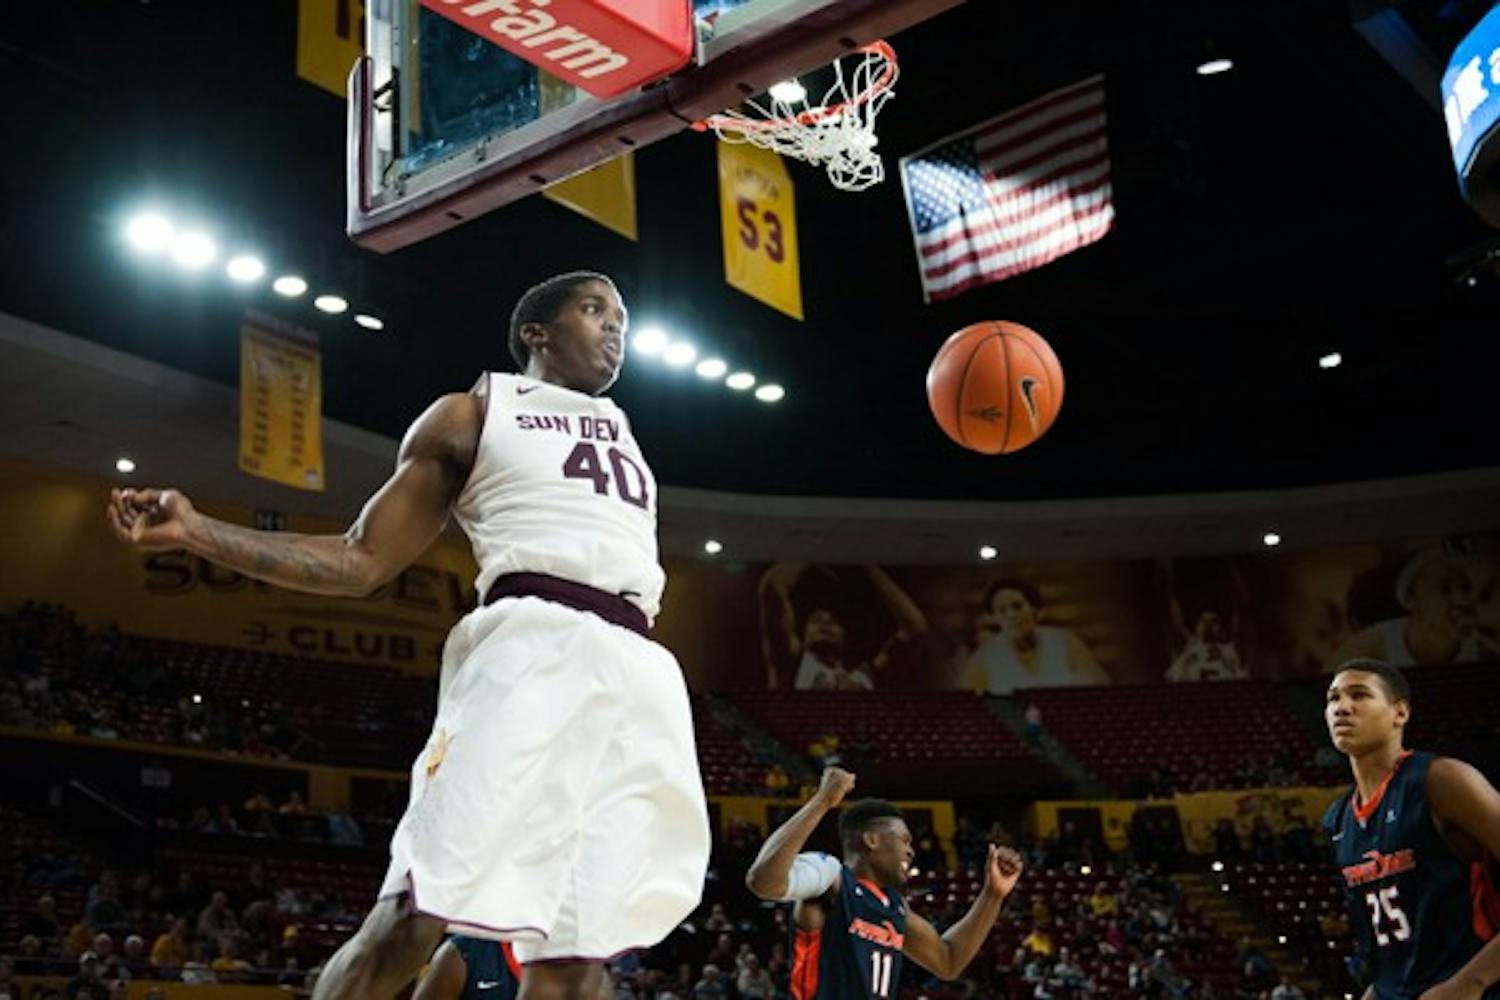 Senior forward Shaquille McKissic dunks the ball in a game against Pepperdine, Saturday, Dec. 13, 2014 at Wells Fargo Arena in Tempe. After trailing the entire first half, the Sun Devils came from behind and defeated the Waves 81-74. (Photo by Ben Moffat)